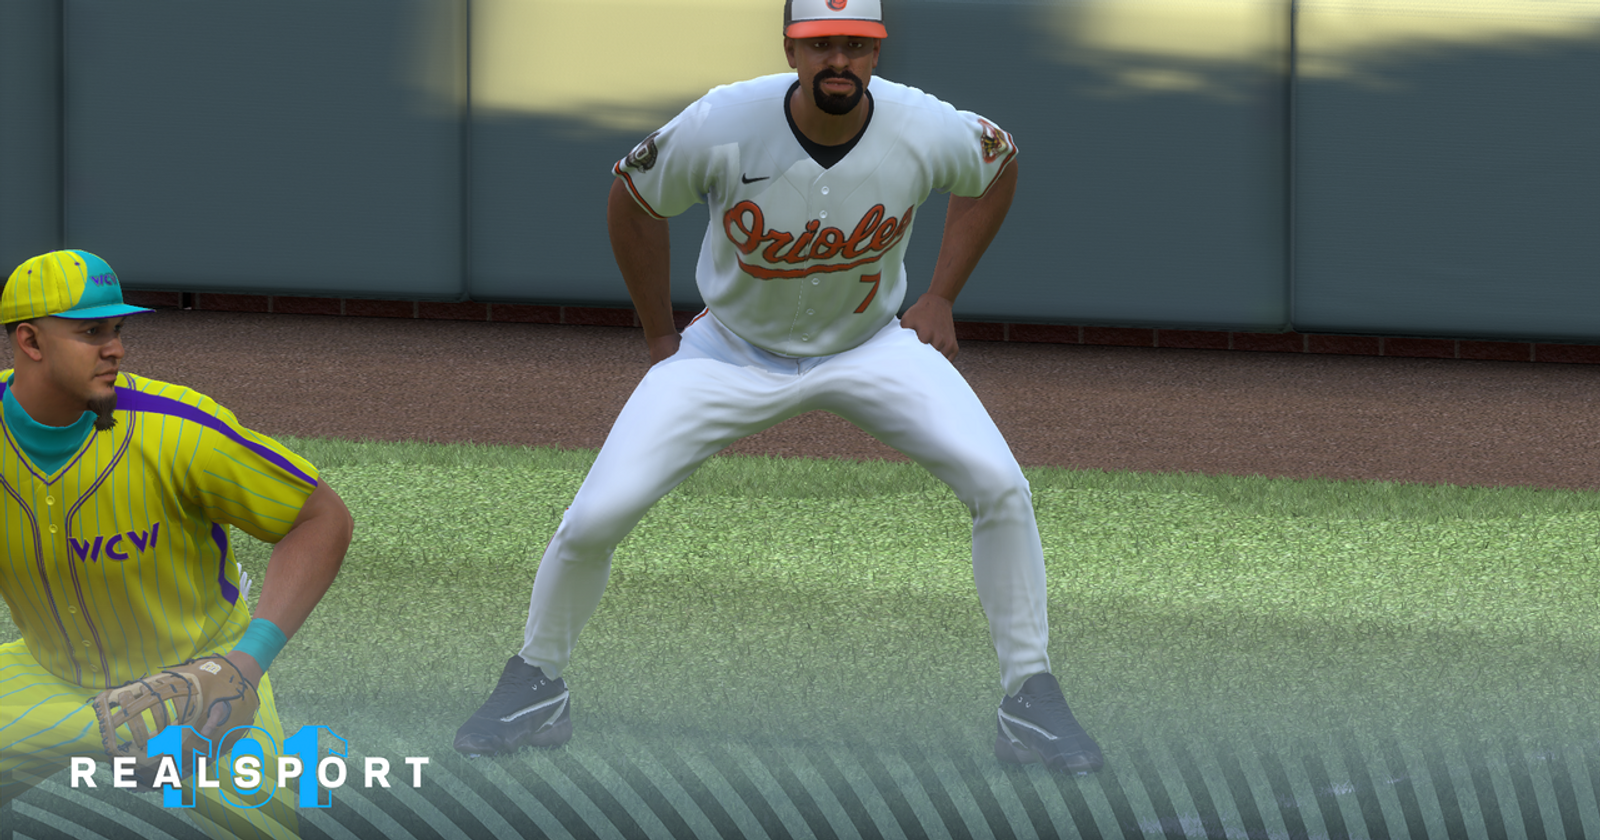 MLB The Show 22 Update 1.10 Patch Notes arrive just before